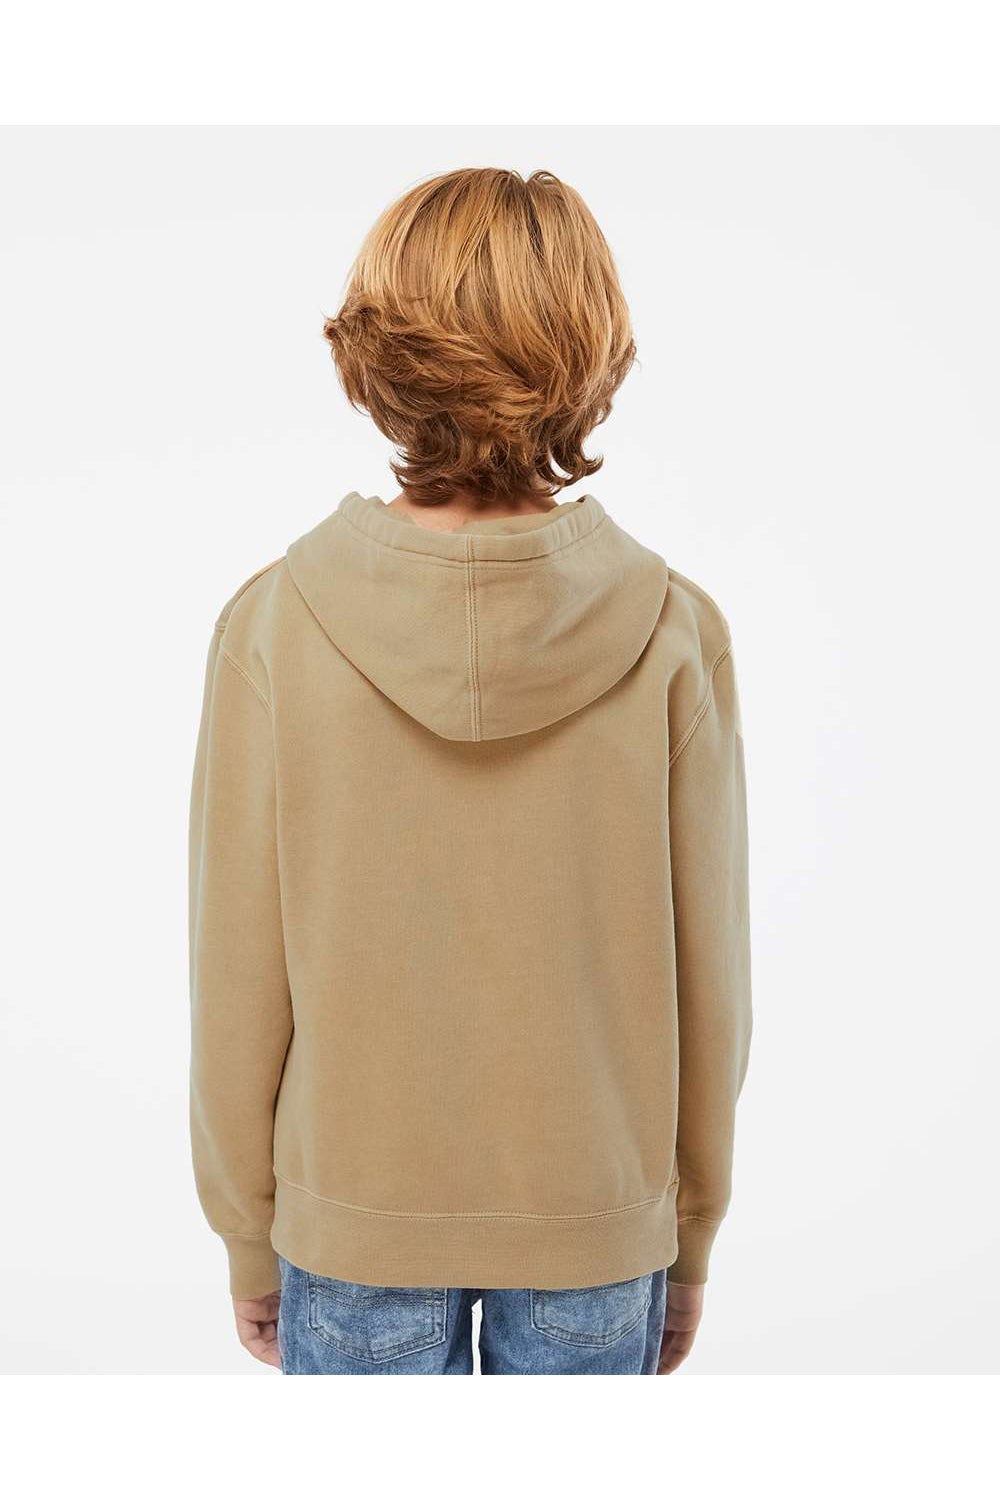 Independent Trading Co. PRM1500Y Youth Pigment Dyed Hooded Sweatshirt Hoodie Sandstone Brown Model Back